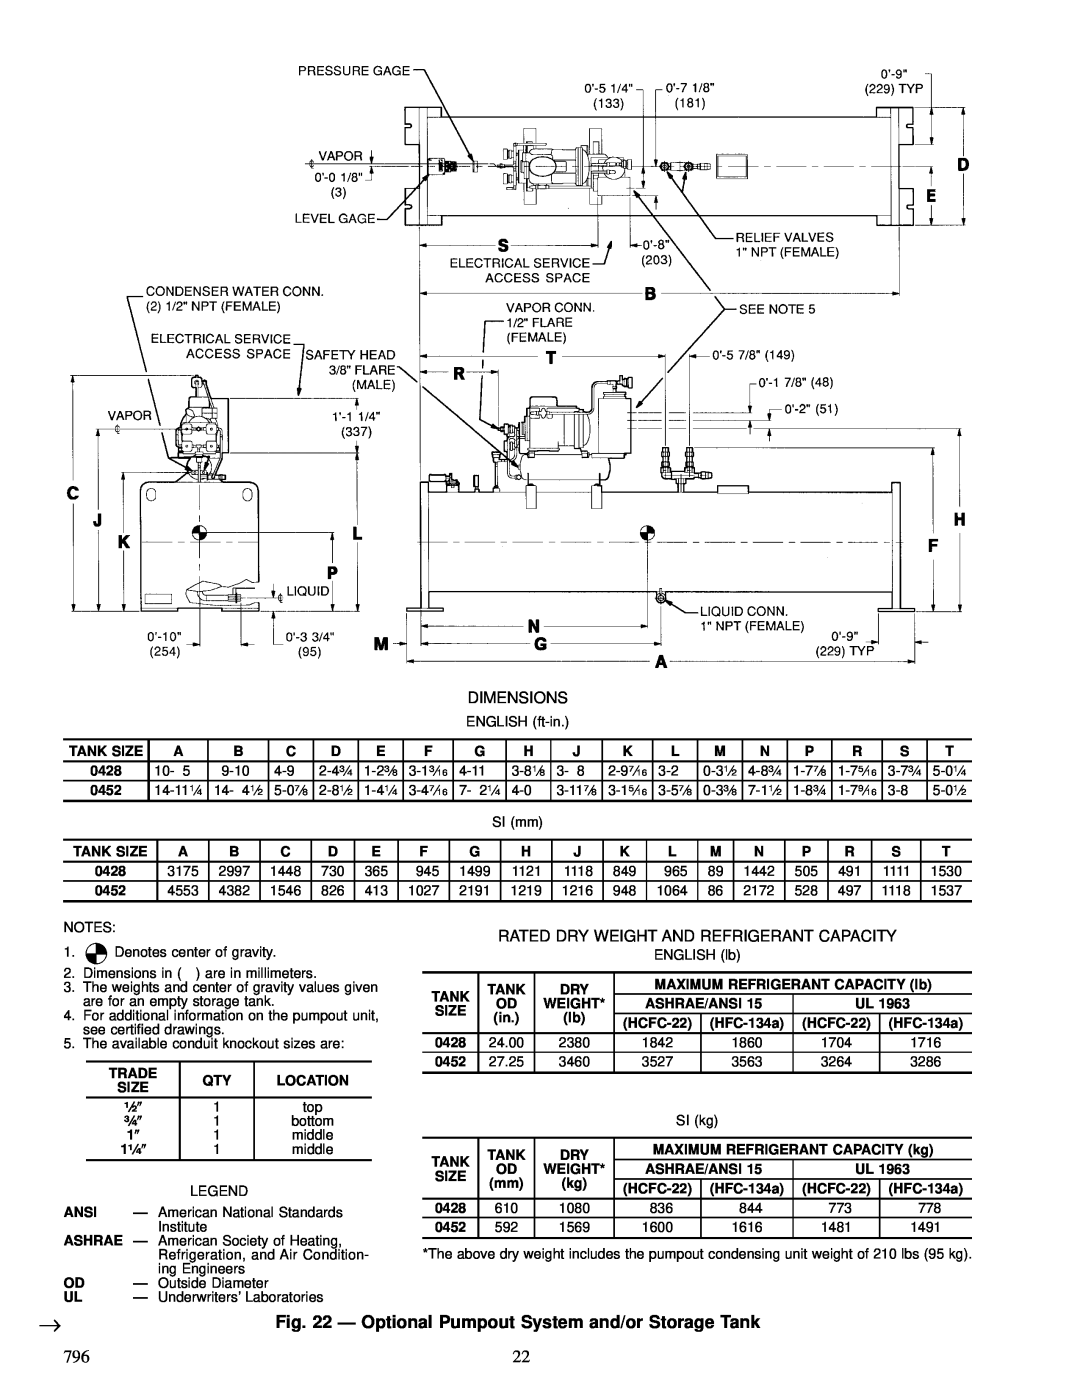 Carrier 23 XL installation instructions Dimensions, Rated Dry Weight And Refrigerant Capacity 